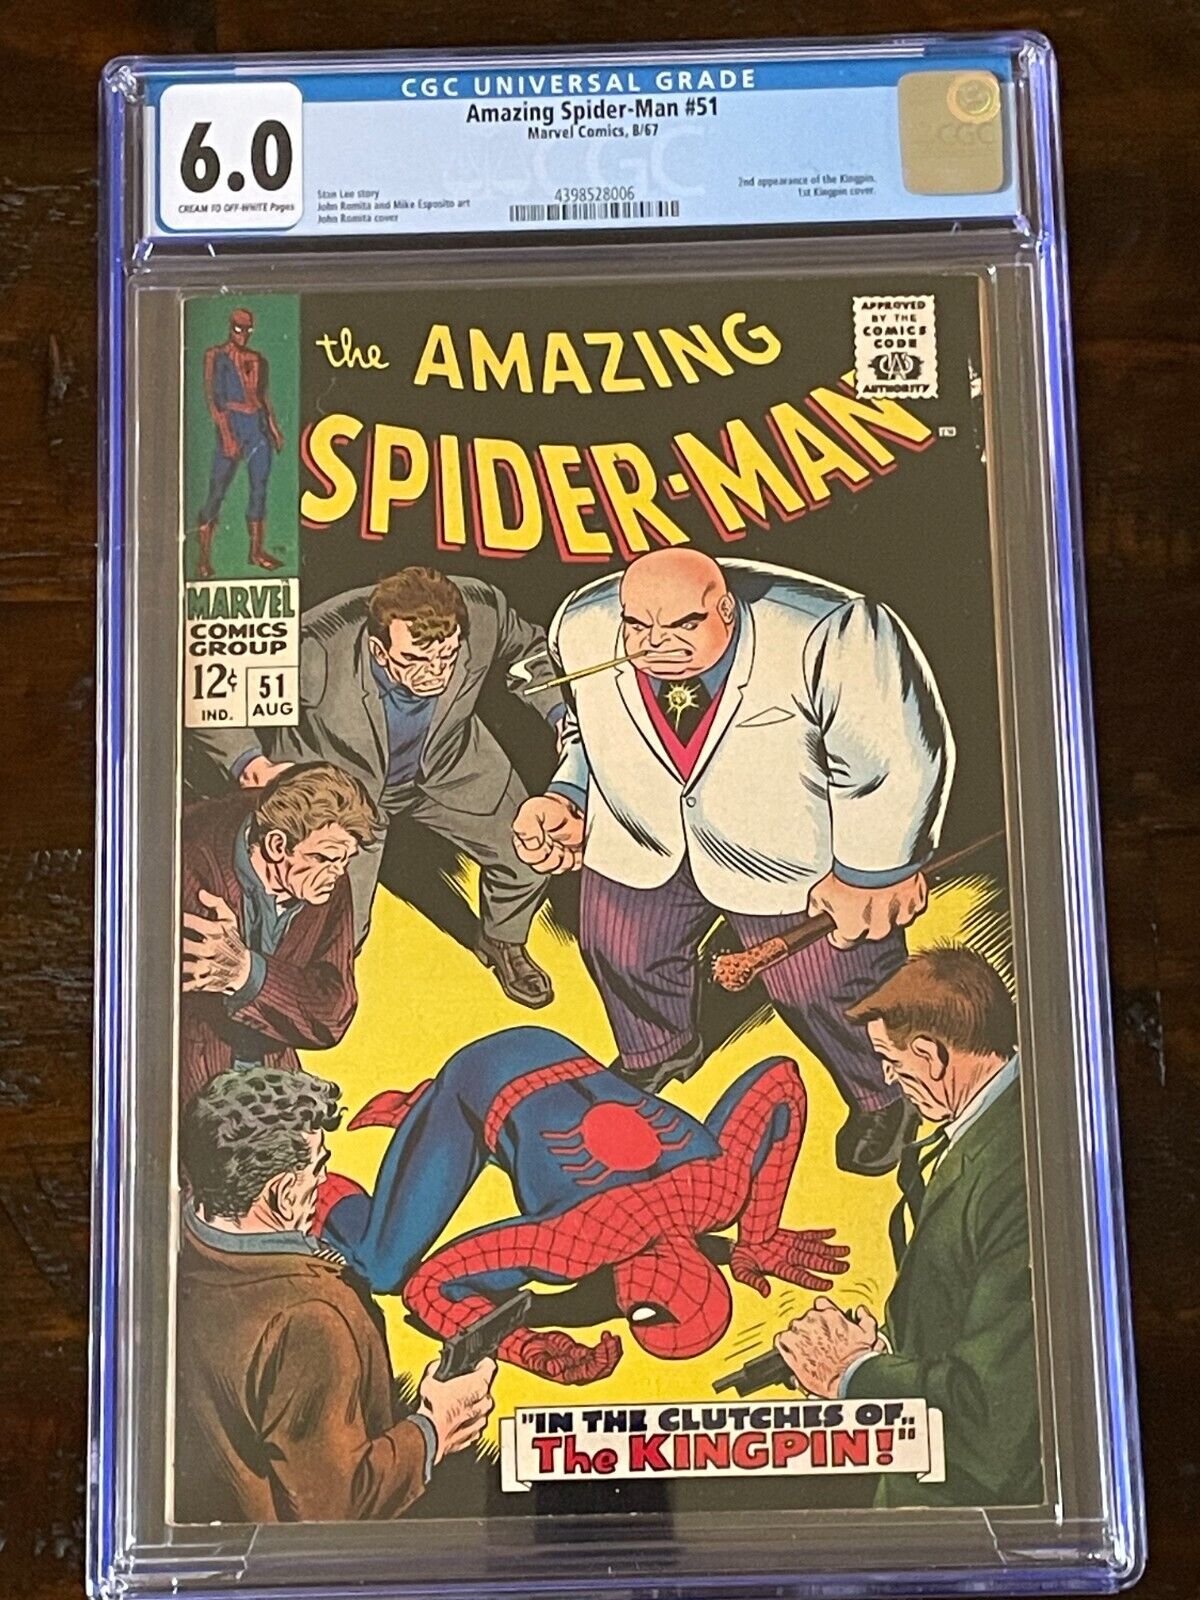 VINTAGE 1967 AMAZING SPIDER-MAN #51 1ST APPEARANCE KINGPIN COVER GRADED CGC 6.0